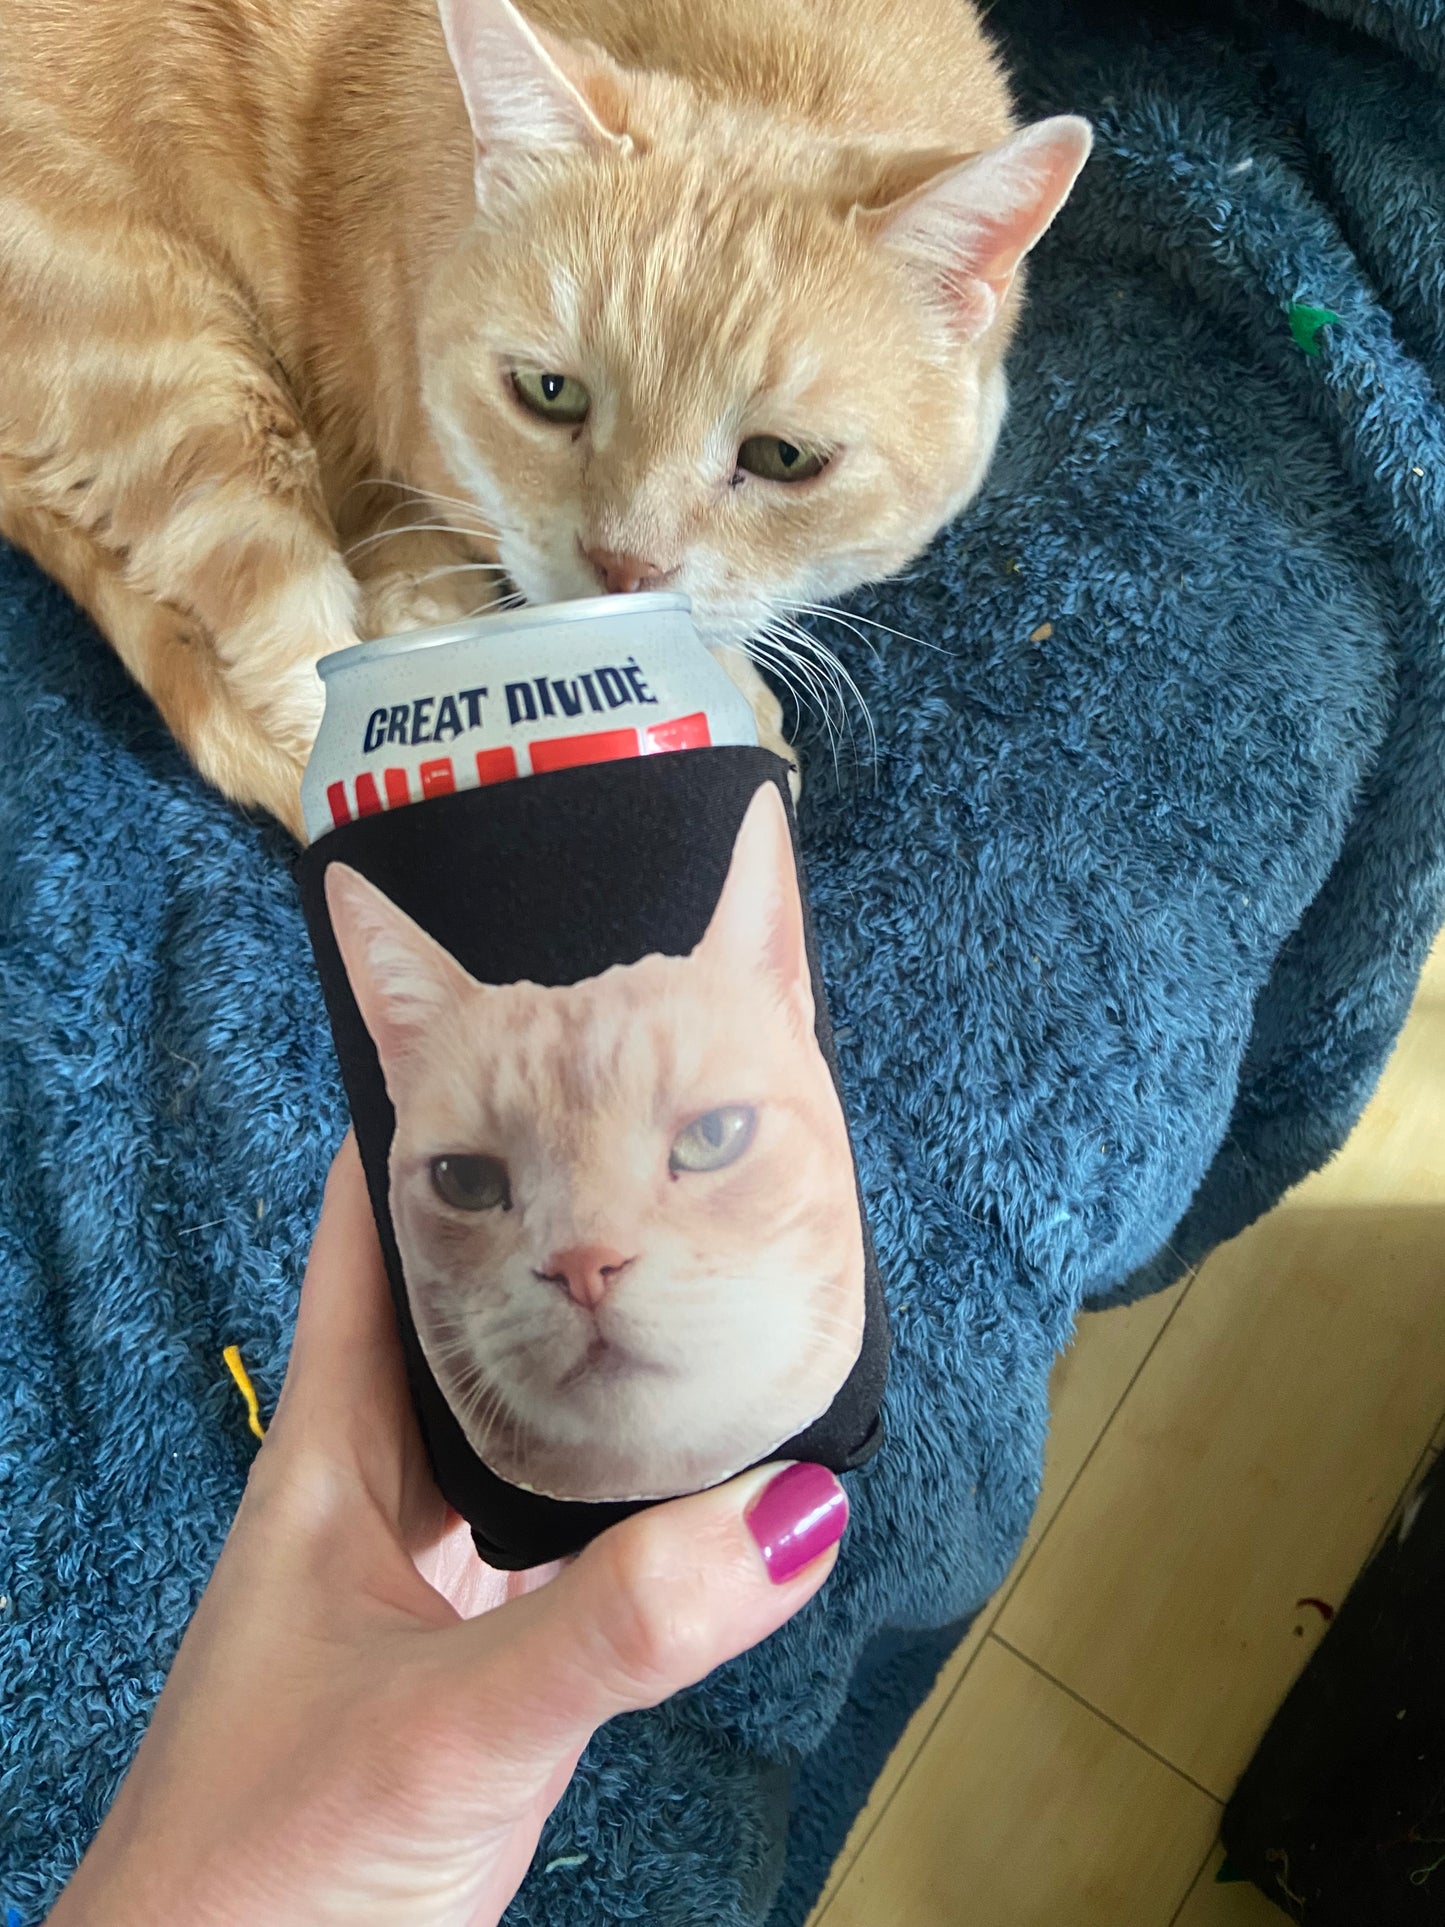 Chips drink coozies